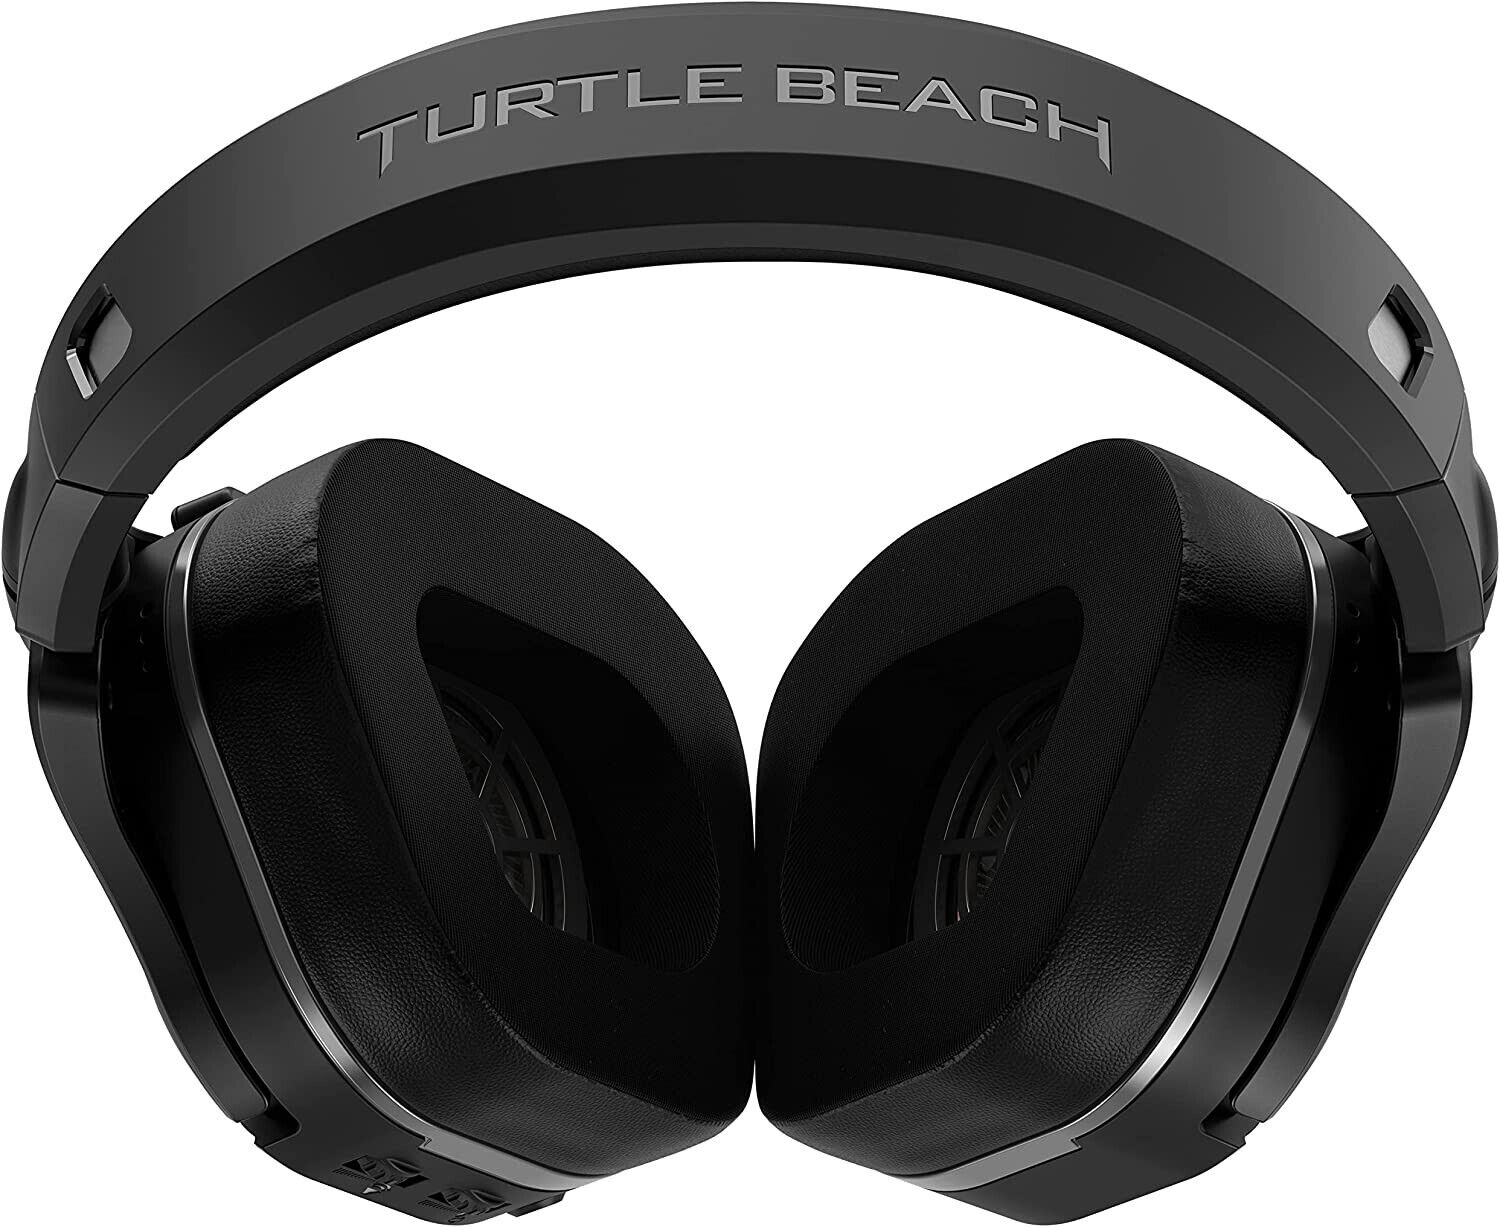 Turtle Beach Stealth 700 Gen 2 Wireless Gaming Headset for PS4 and